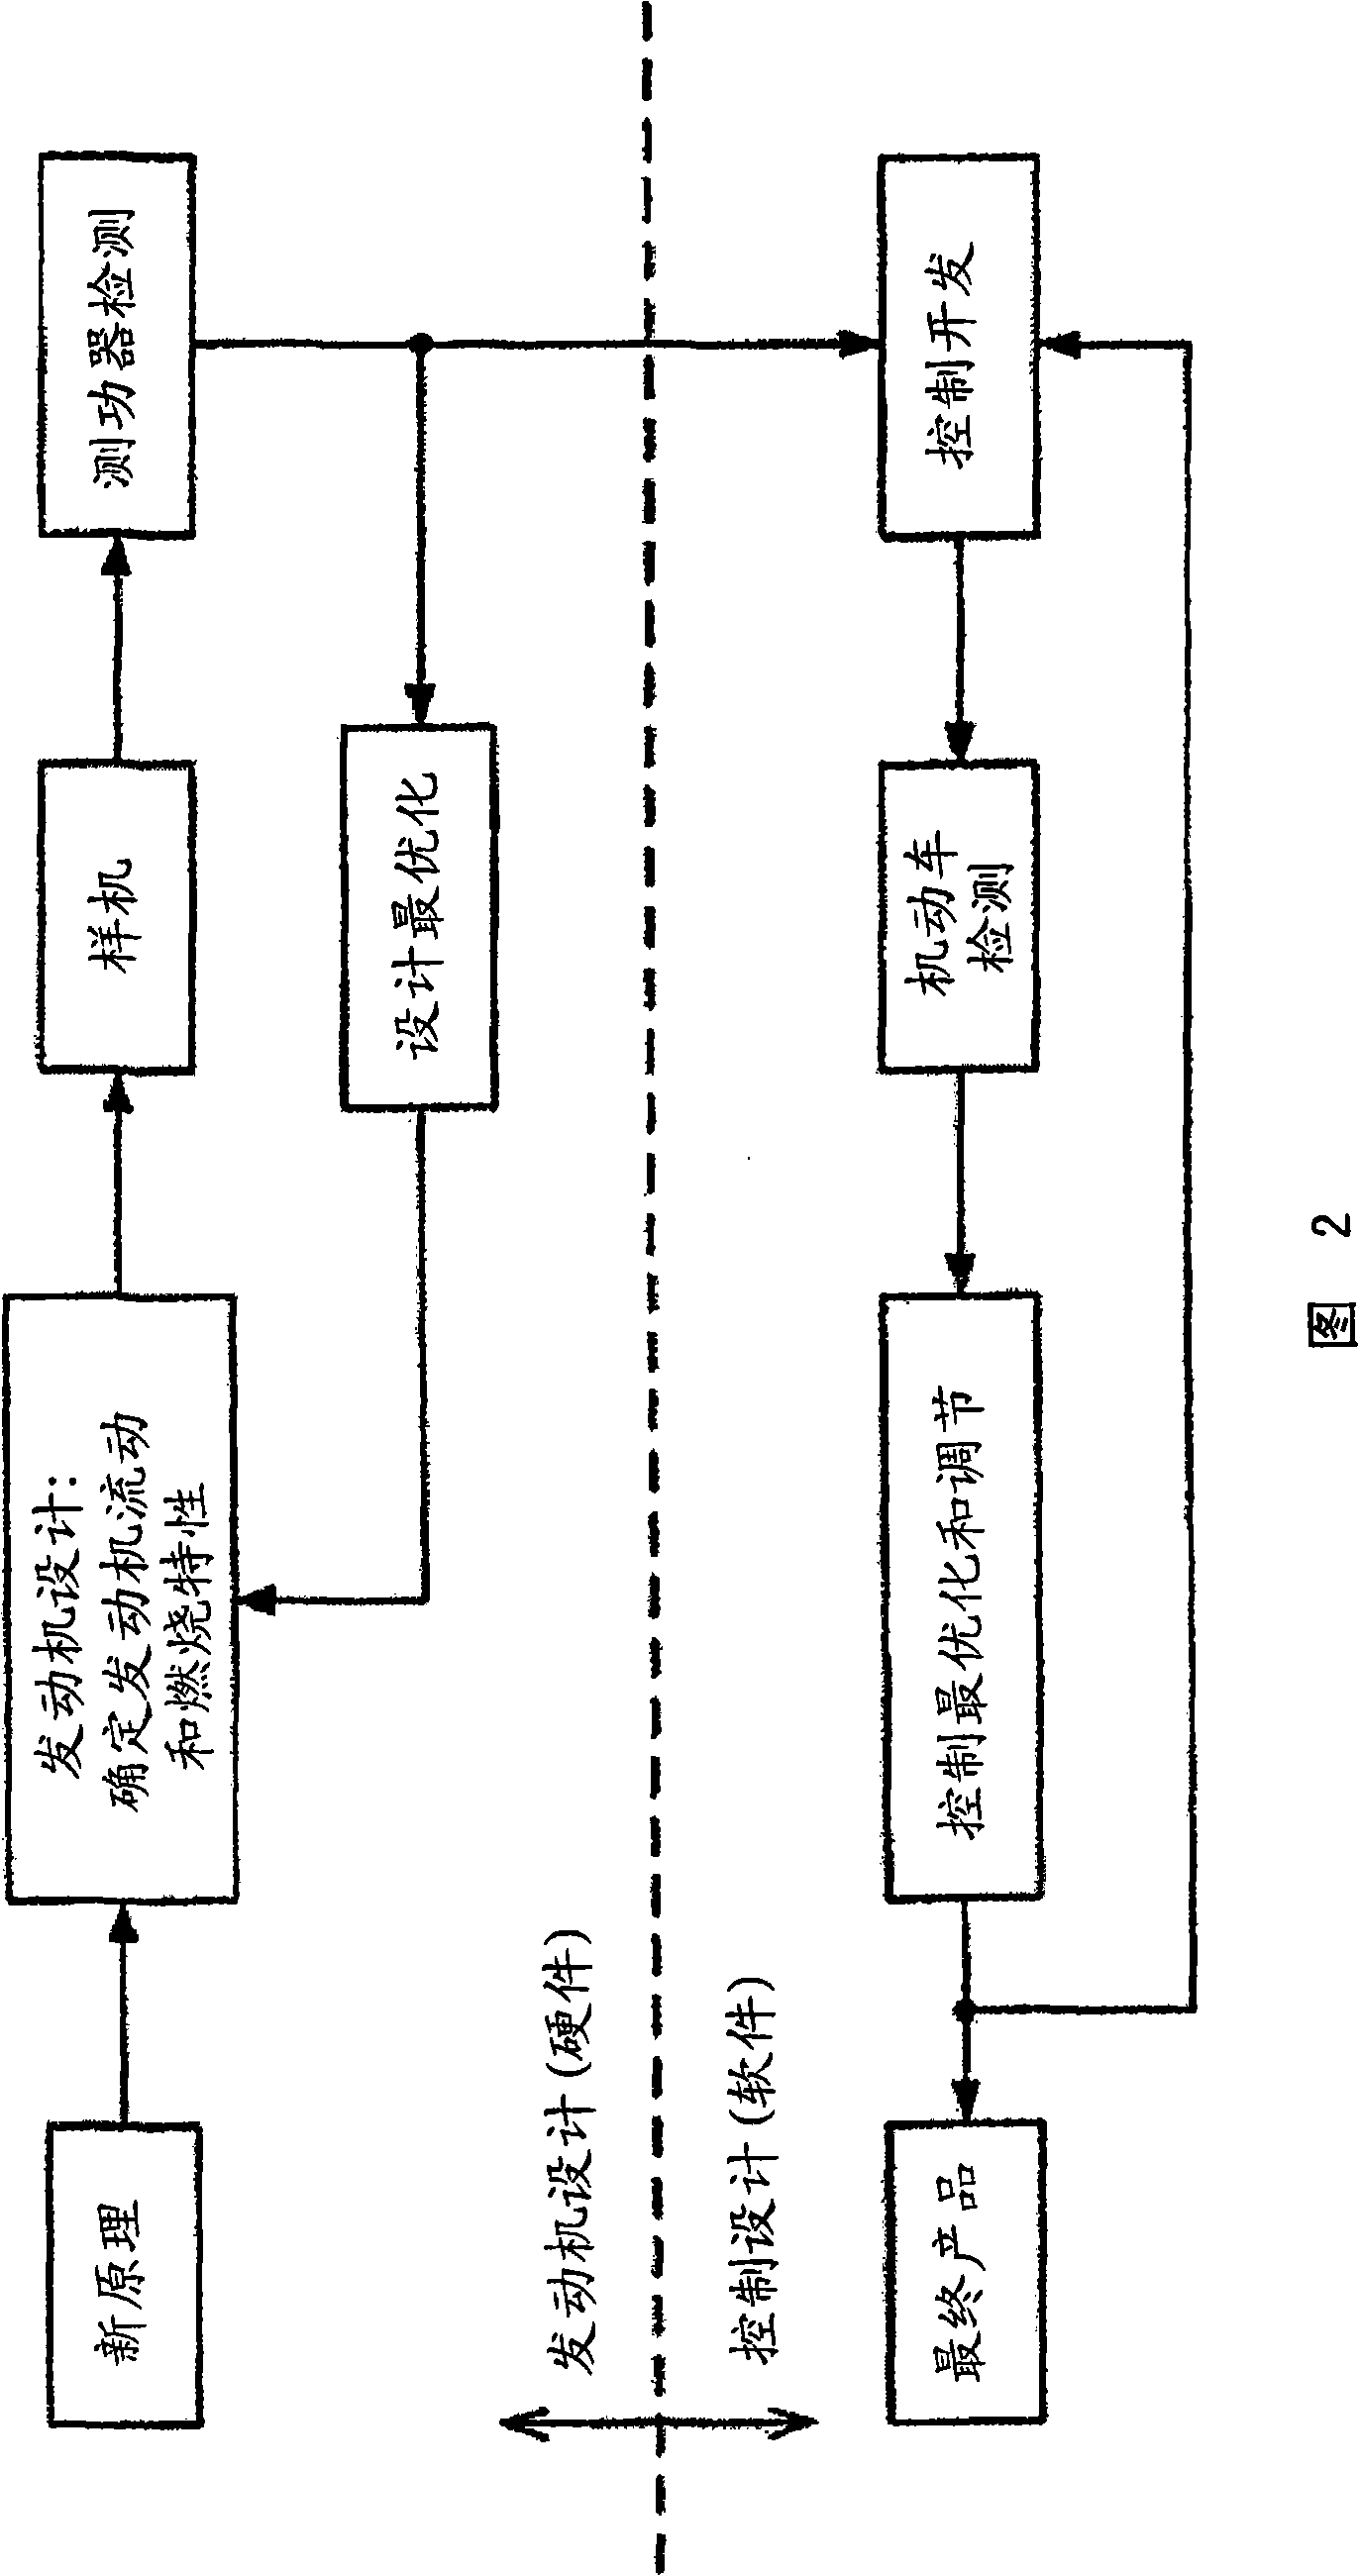 Rapid bench examination and modeling method for engine